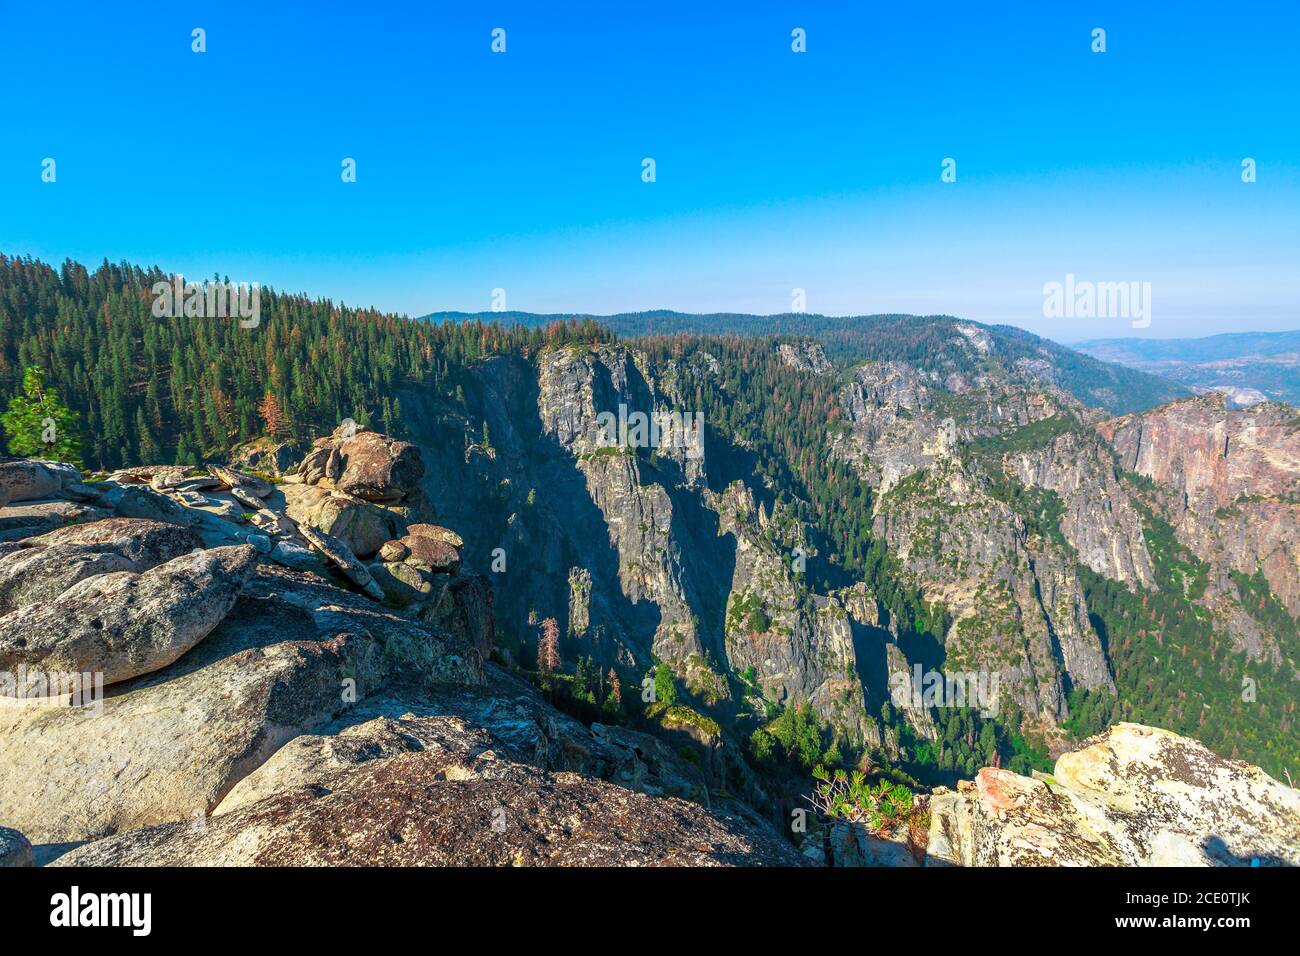 Taft Point lookout in Yosemite National Park, California, United States. The view from Taft Point: Yosemite Valley, El Capitan and Yosemite Falls Stock Photo